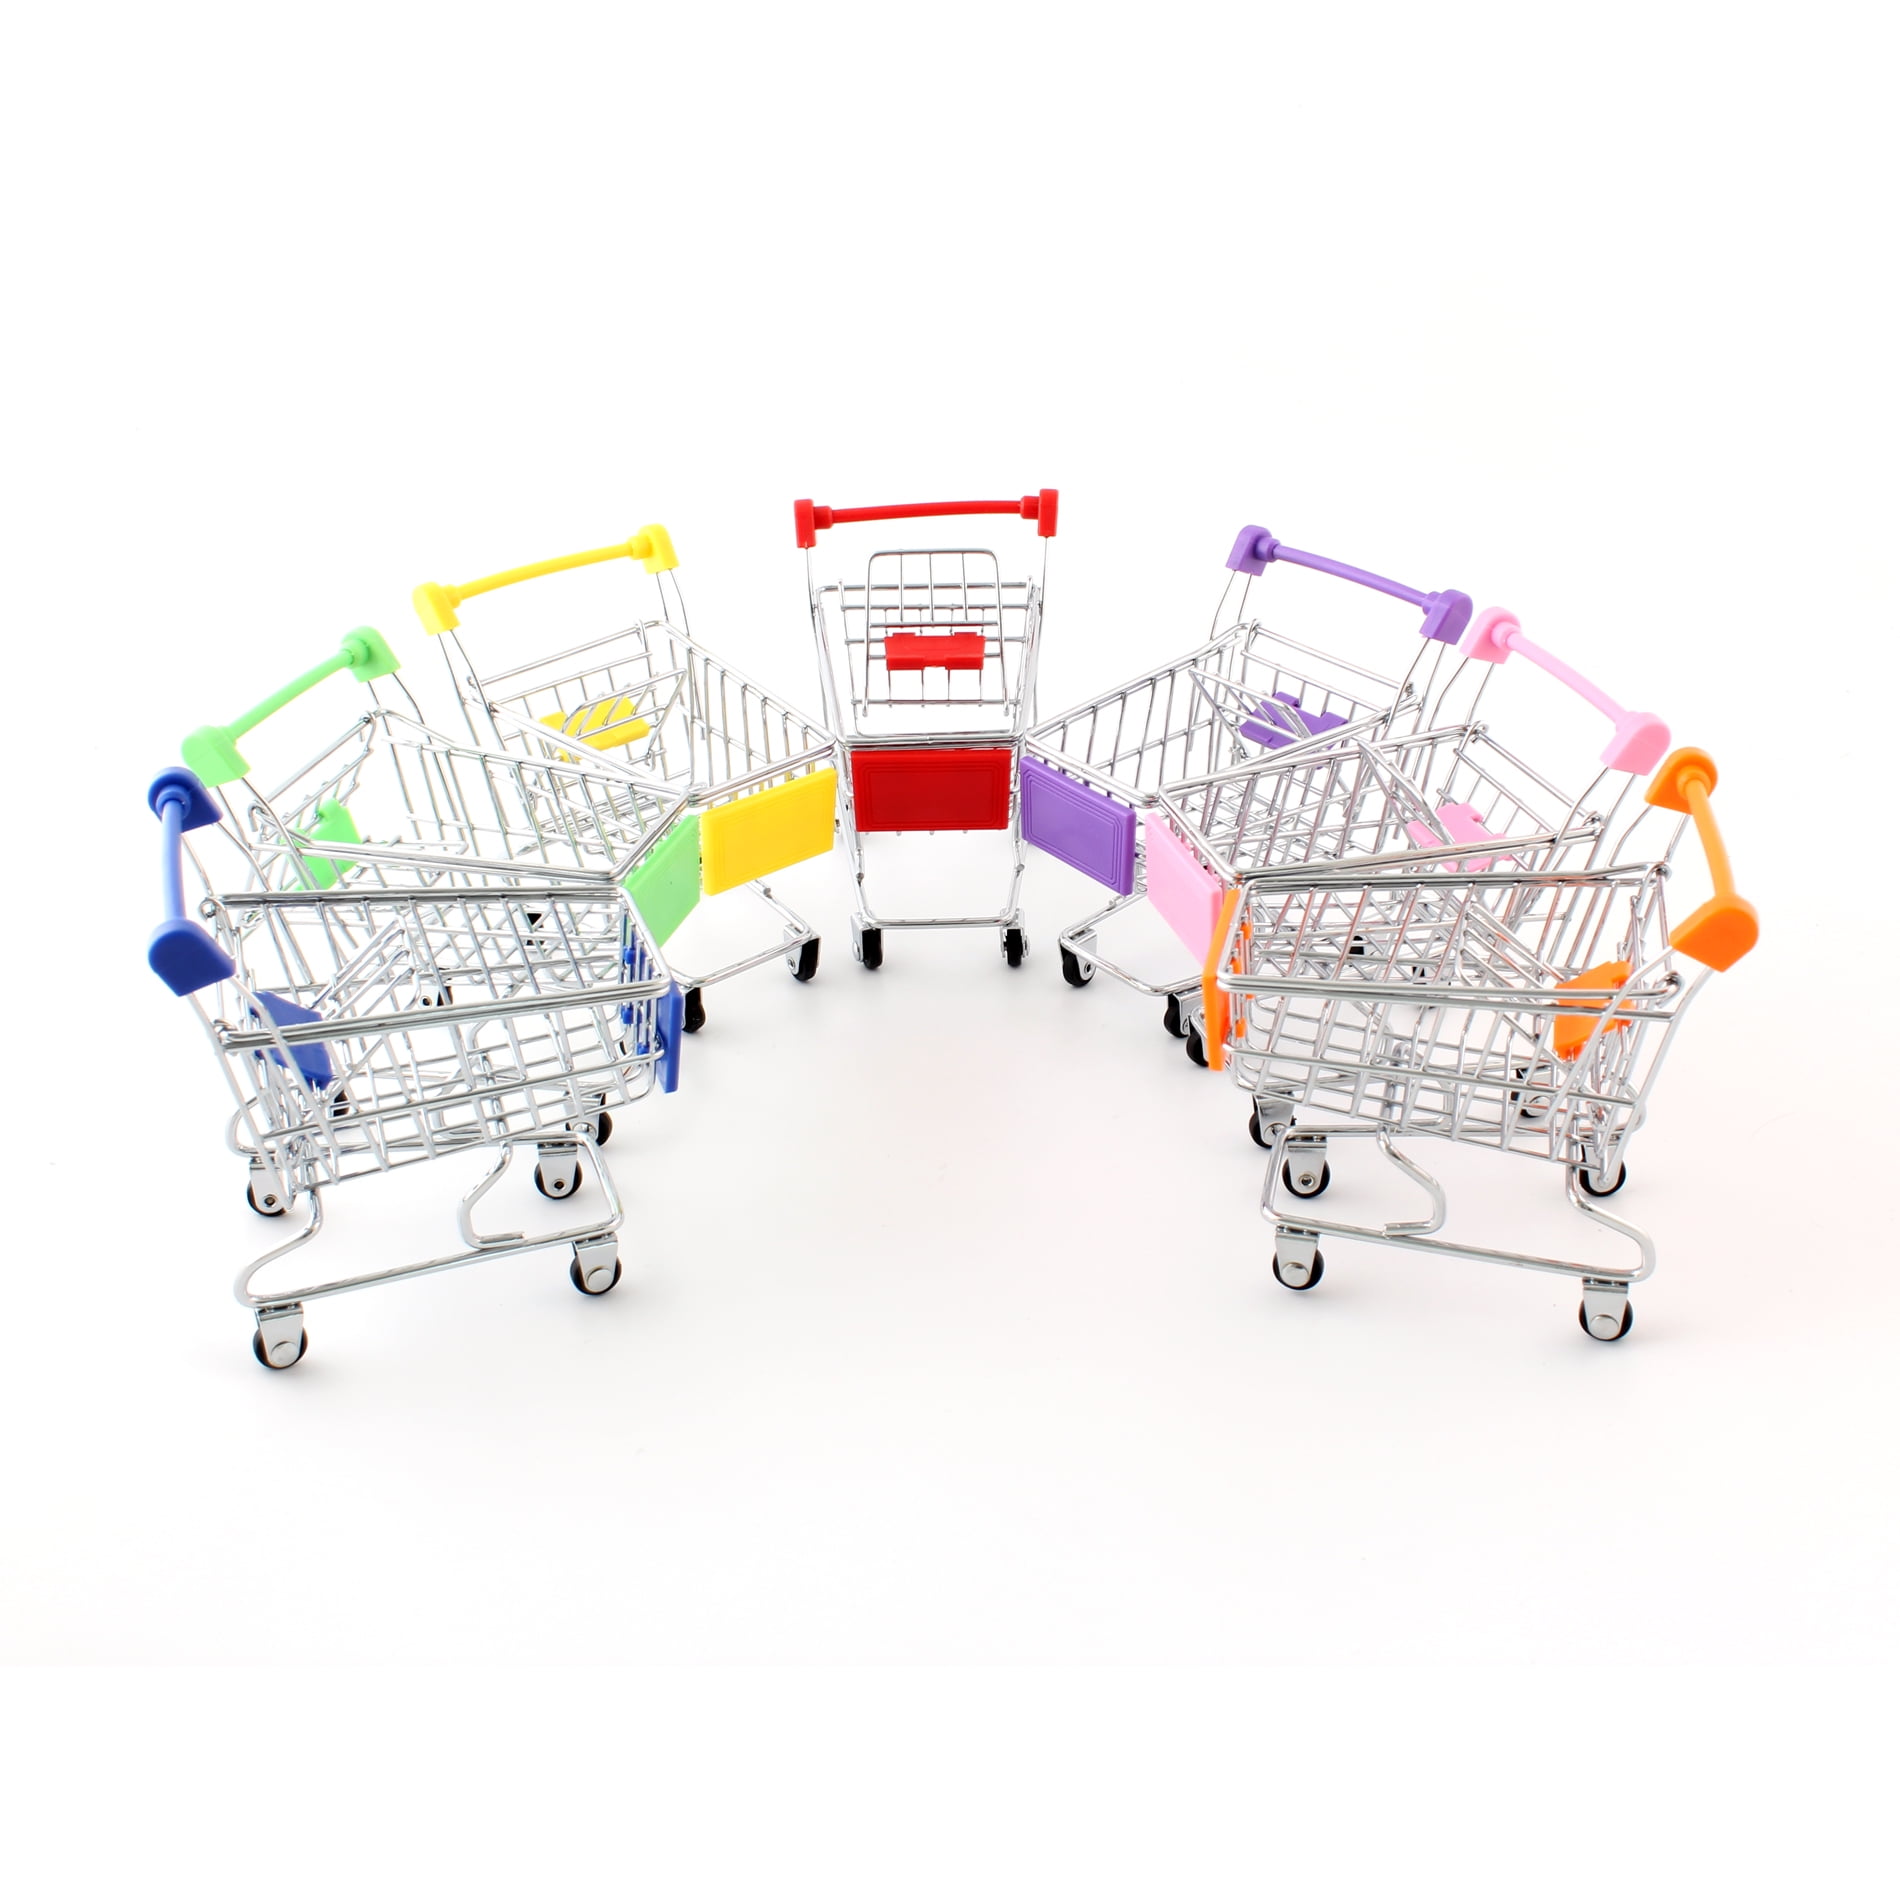 AM_ EE_ SUPERMARKET HAND TROLLEY MINI SHOPPING CART STORAGE TOY GIFT FANTASTIC 